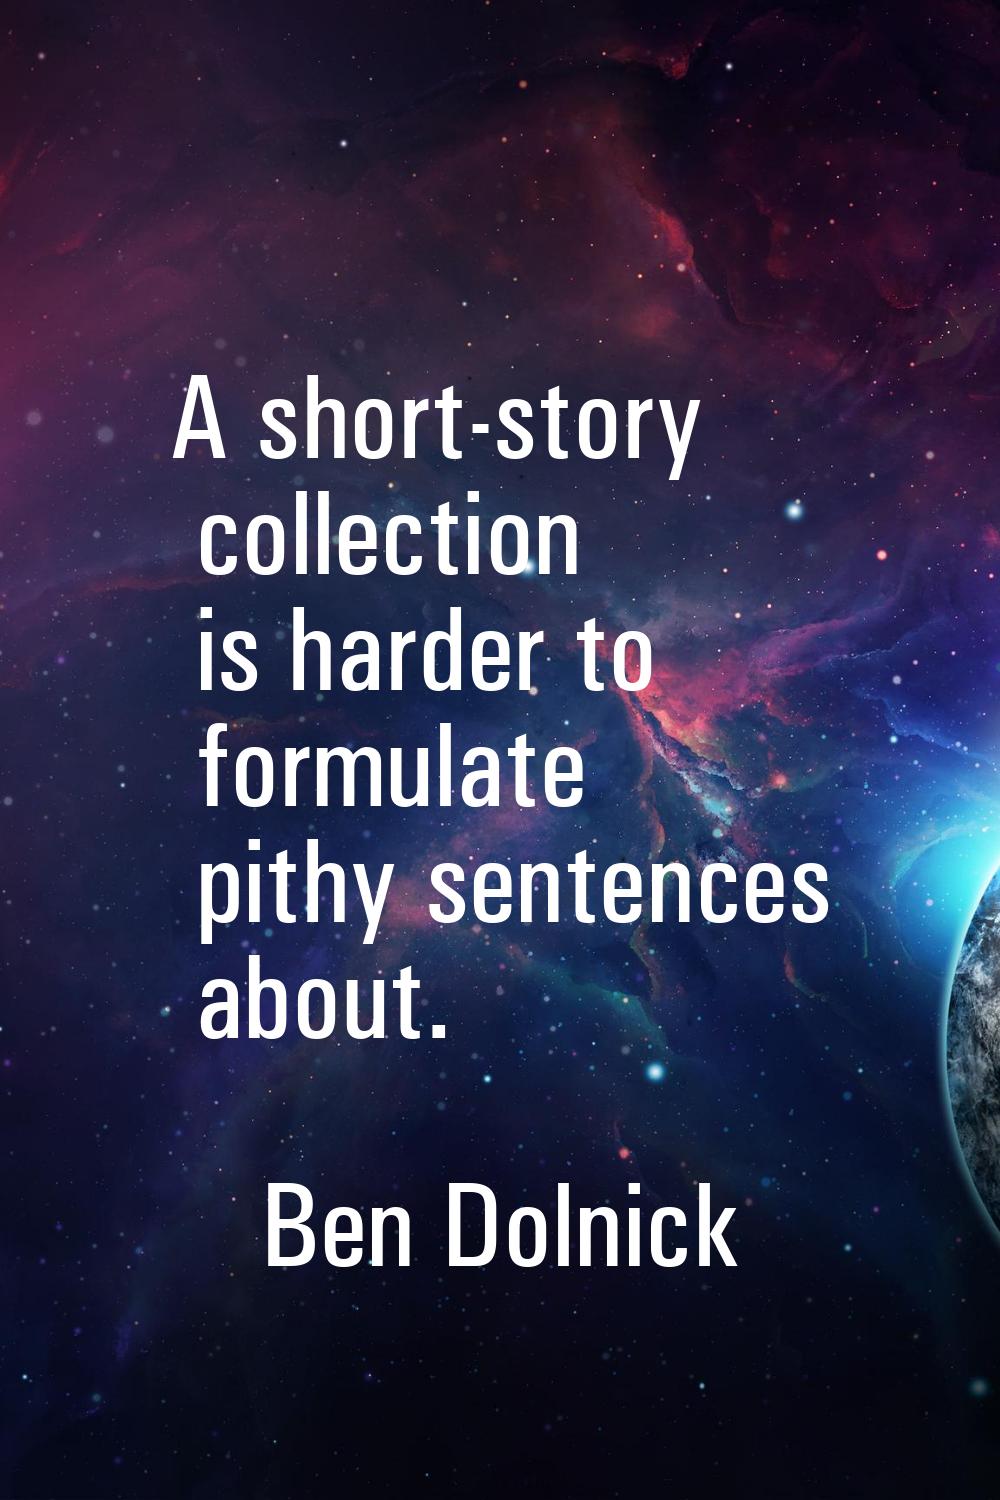 A short-story collection is harder to formulate pithy sentences about.